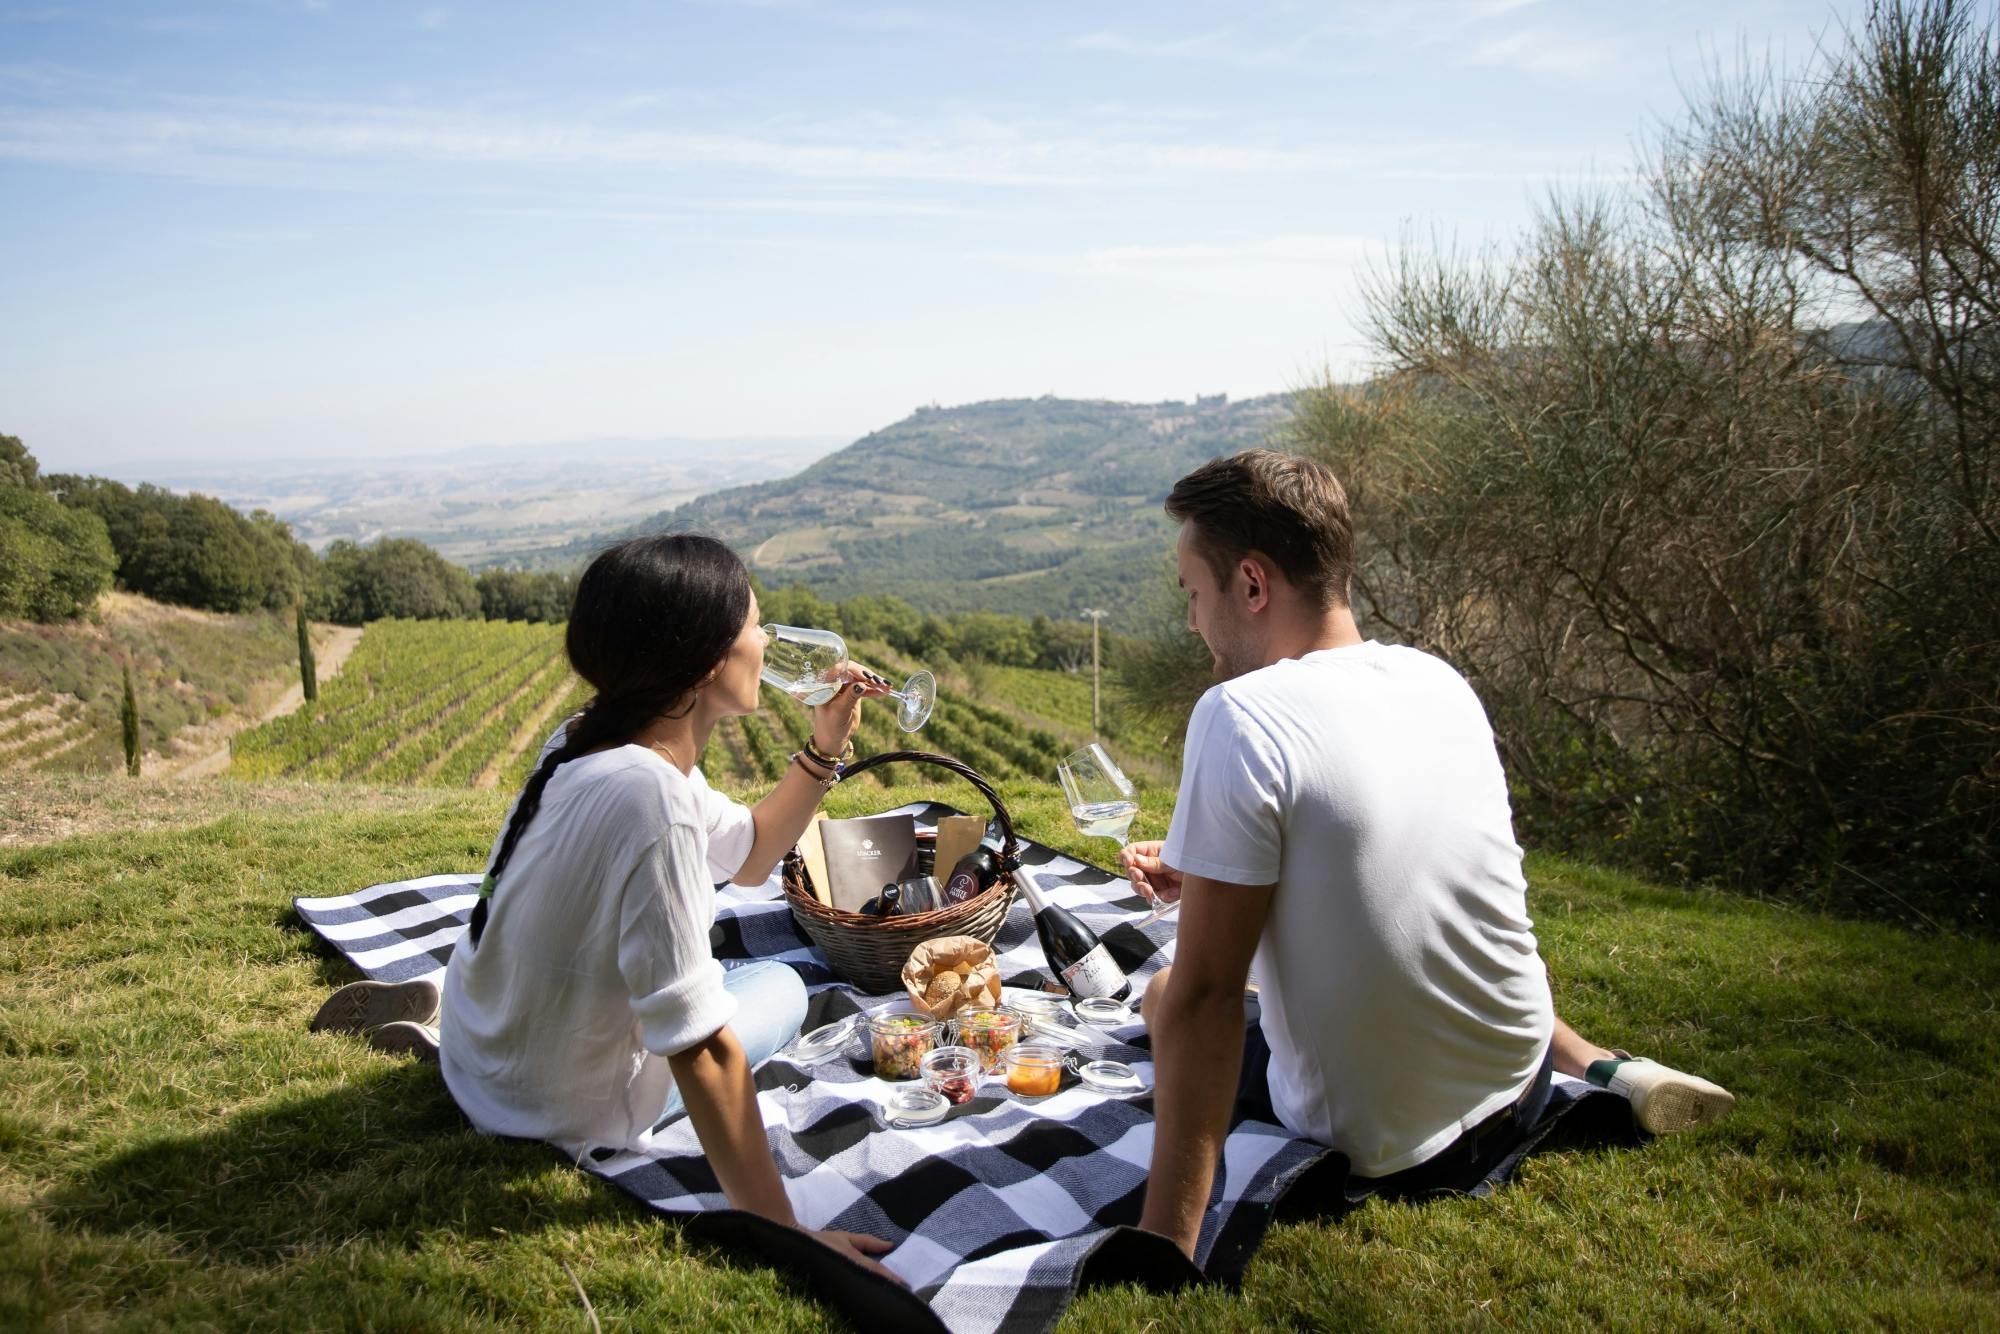 Picnic With a Bottle of Wine in Montalcino With Optional Wine Tour